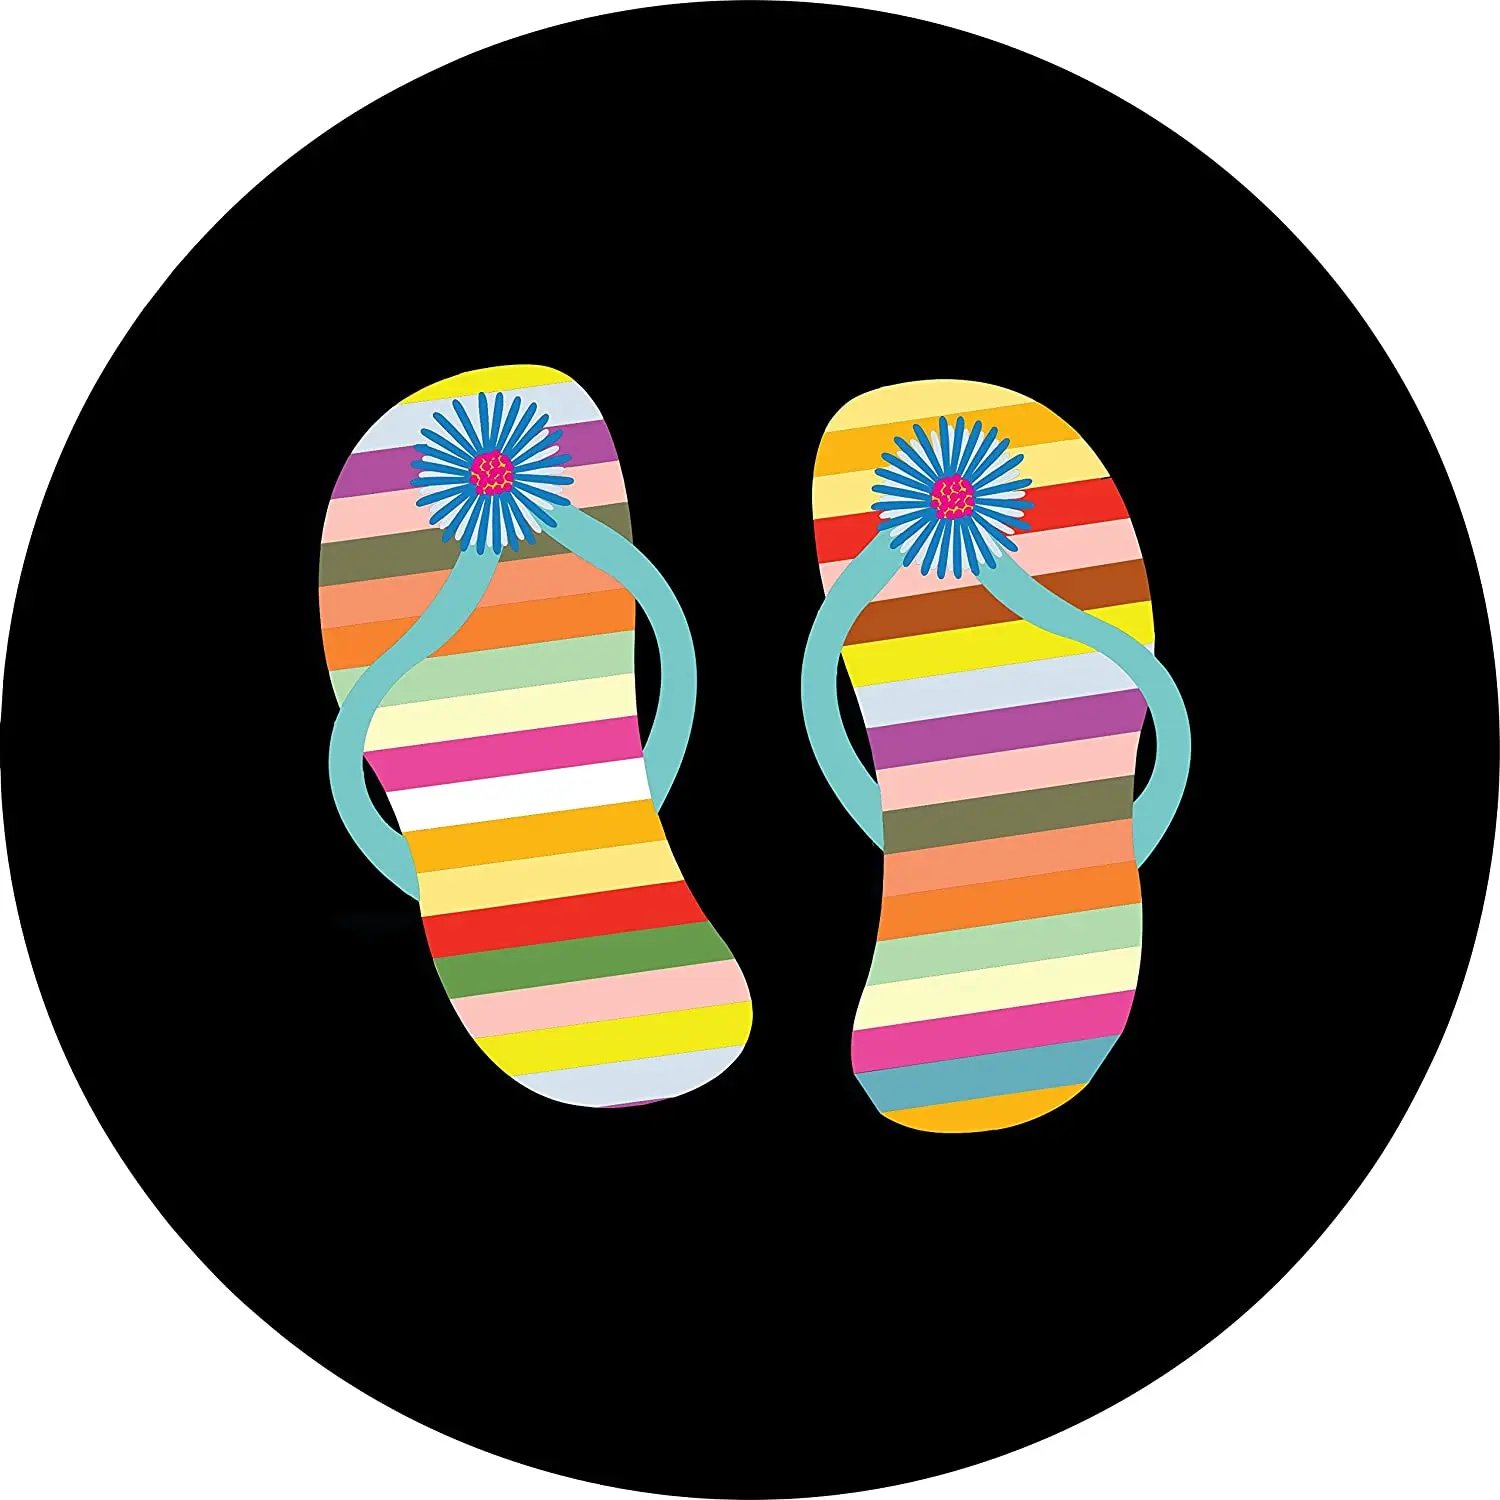 

TIRE COVER CENTRAL Flip Flops Multi Color Stripe Daisy Spare Tire Cover ( Custom Sized to Any Make/Model 255/75r17